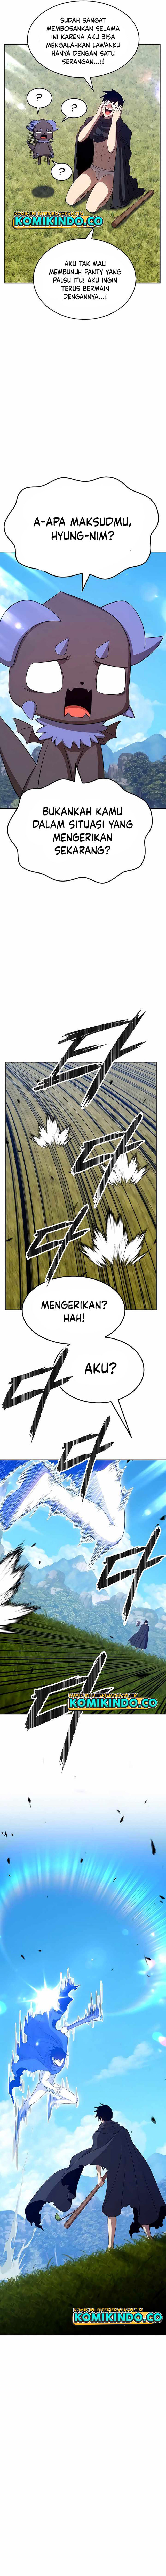 +99 Wooden Stick Chapter 19 Image 35